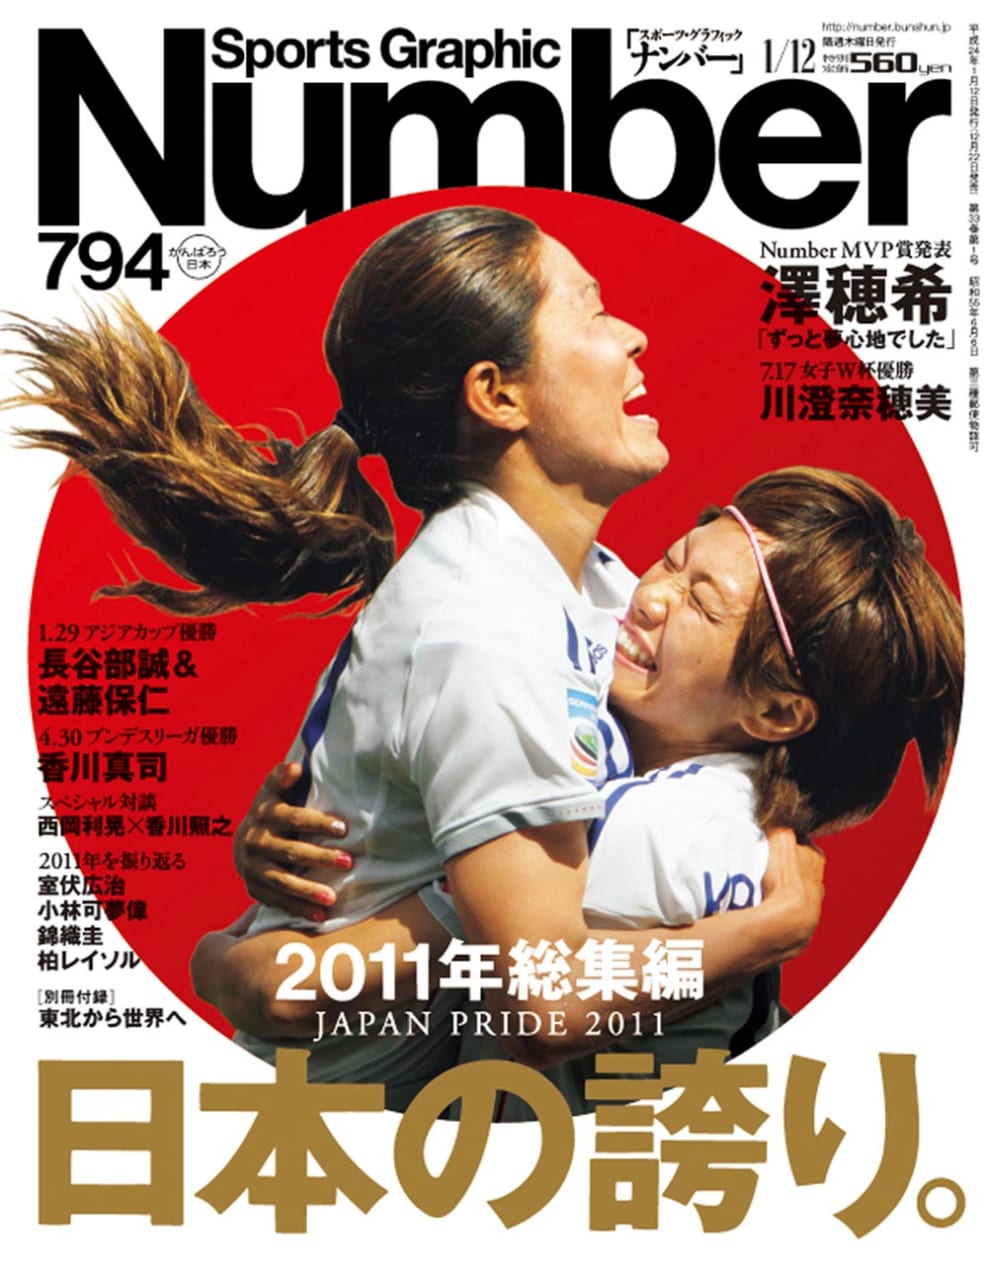 Sports Graphic Number 794号
2011年12月22日発売
表紙撮影：AFLO